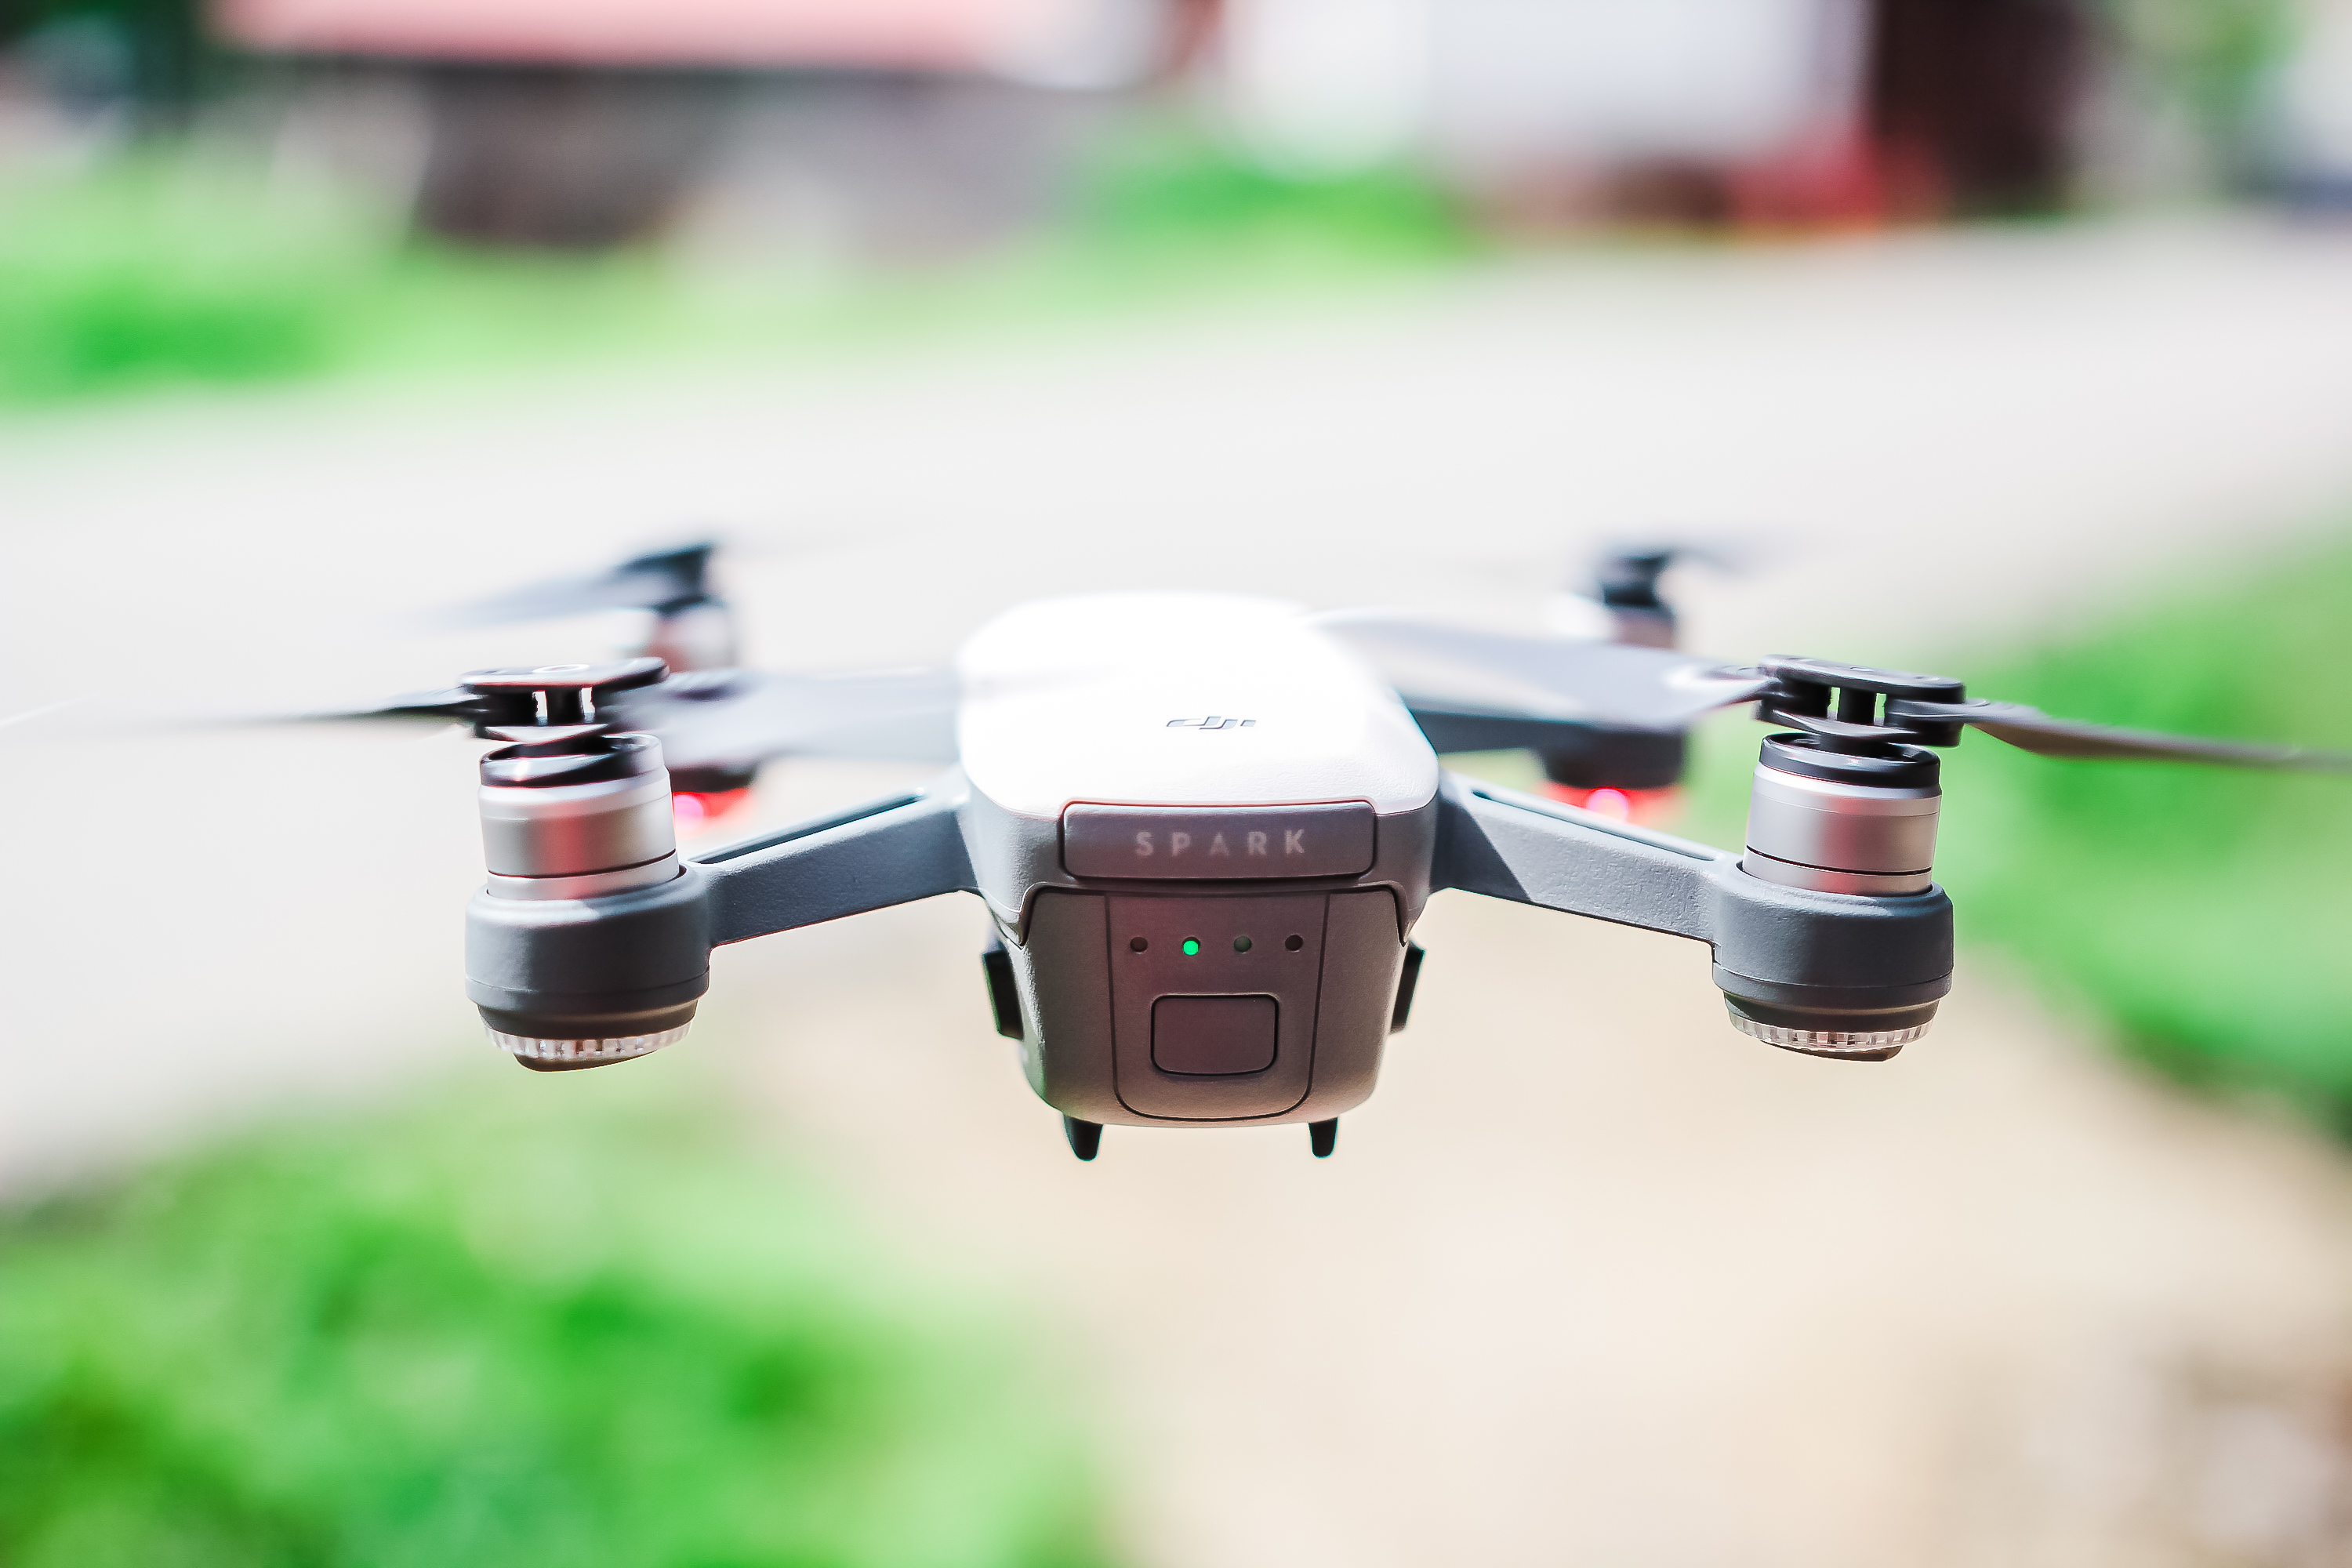 Skyward.io Helps Drone Pilots Obtain Instant Airspace Authorization